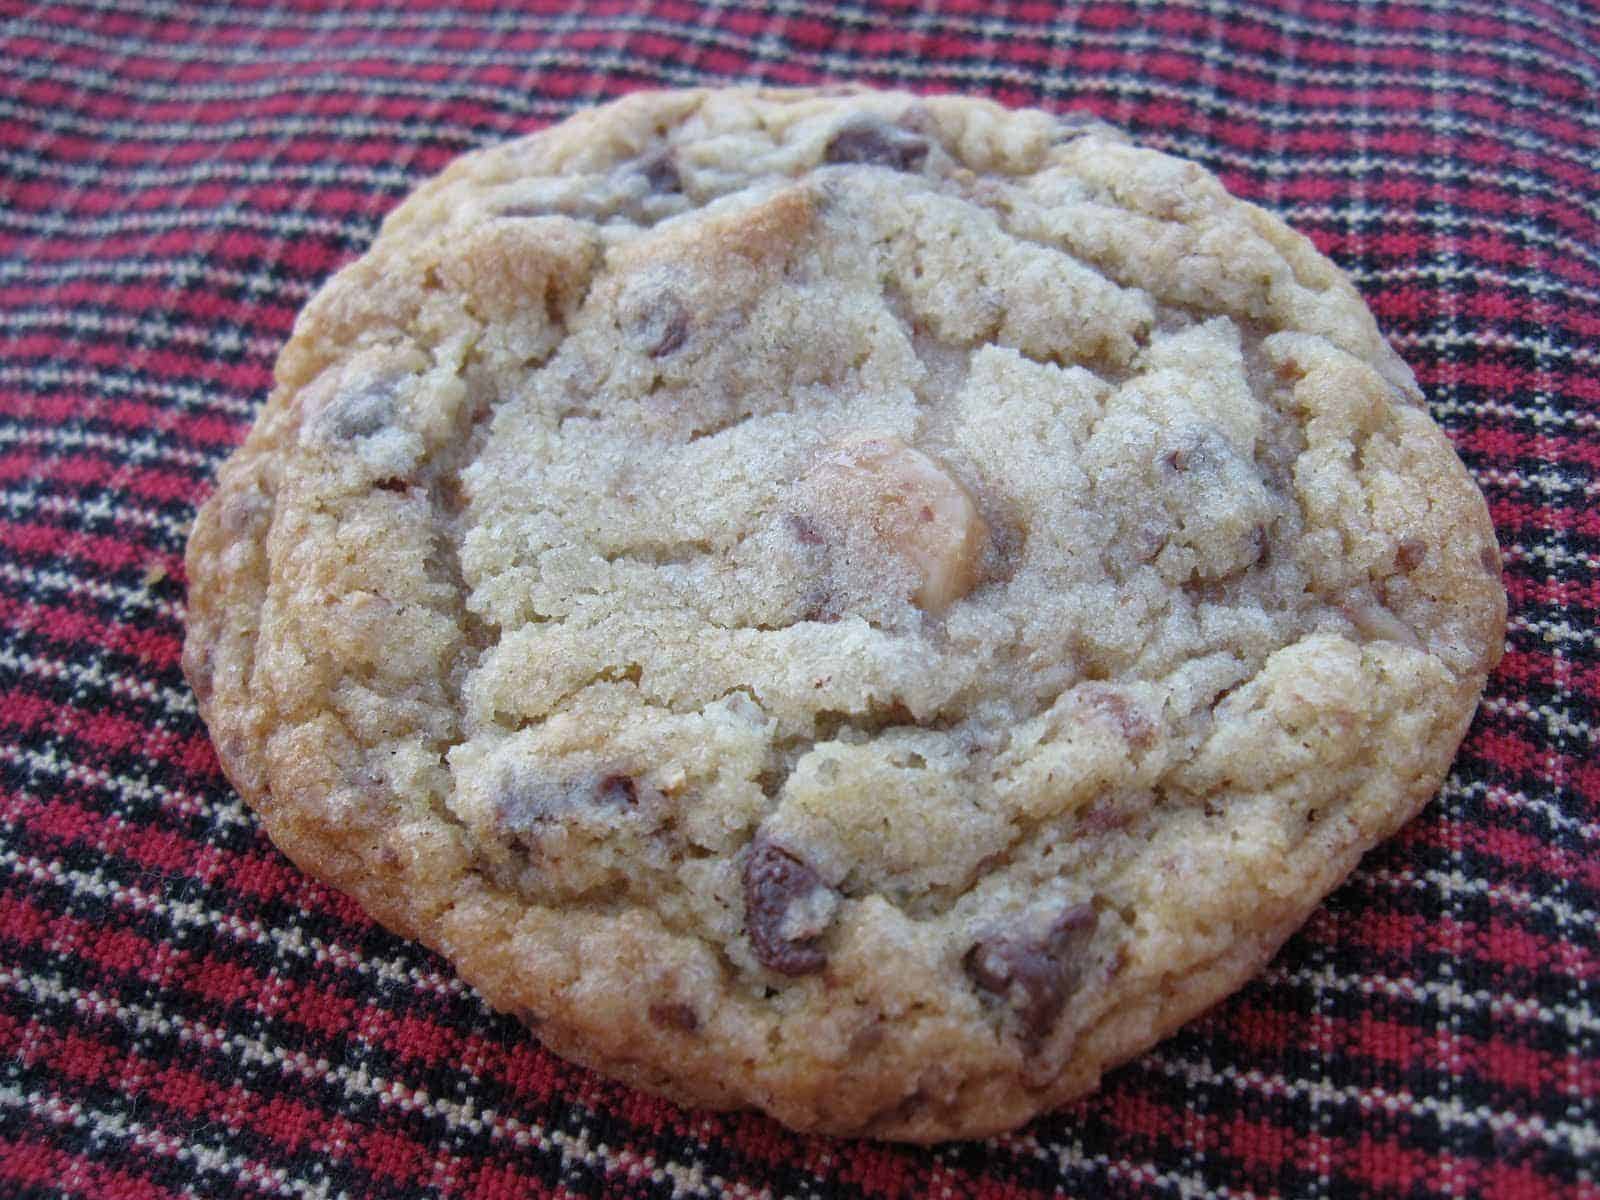 Overhead view of a toffee chip chocolate chip cookie on a plaid background